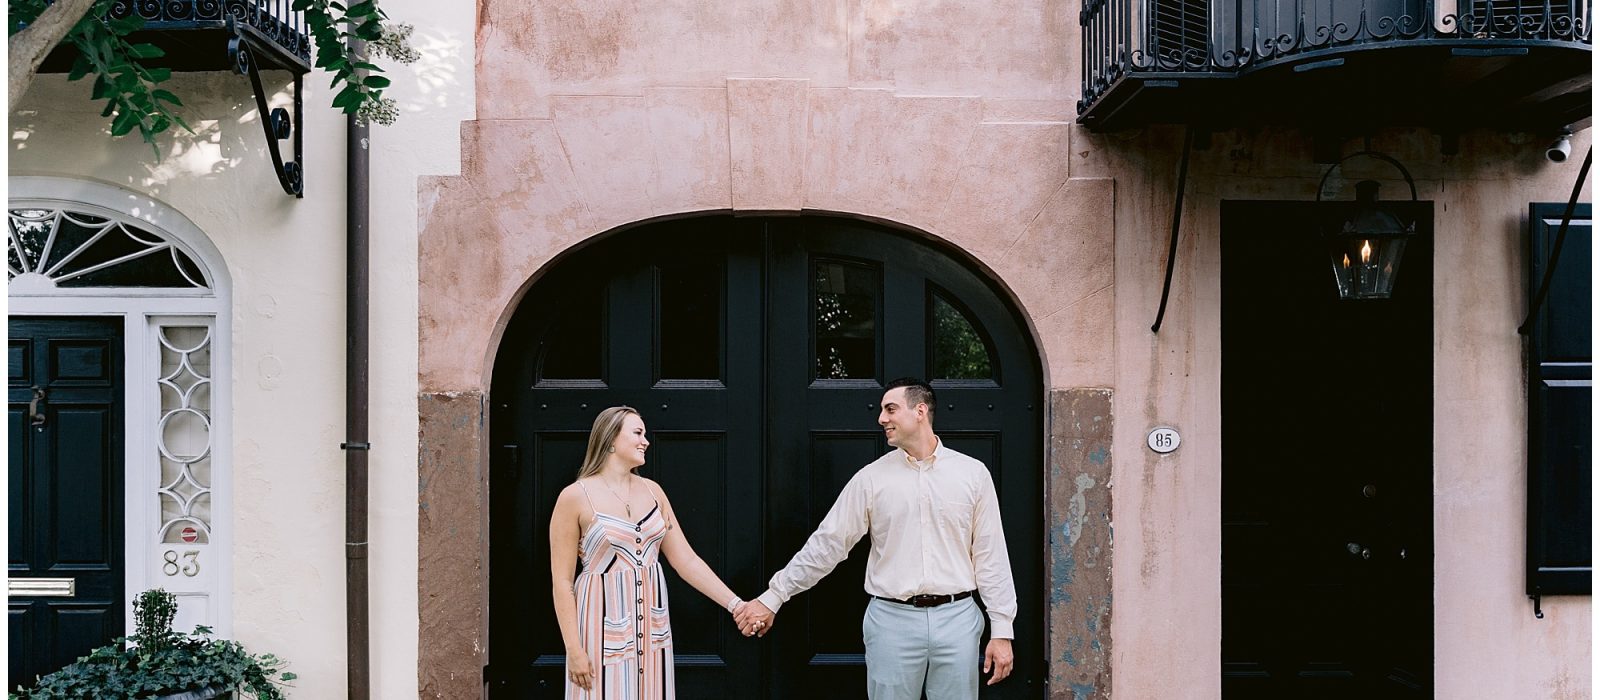 Couple standing in front of beautiful doors in Charleston, SC for their engagement portraits taken by Kathy Beaver Photography, a South Carolina wedding photographer.